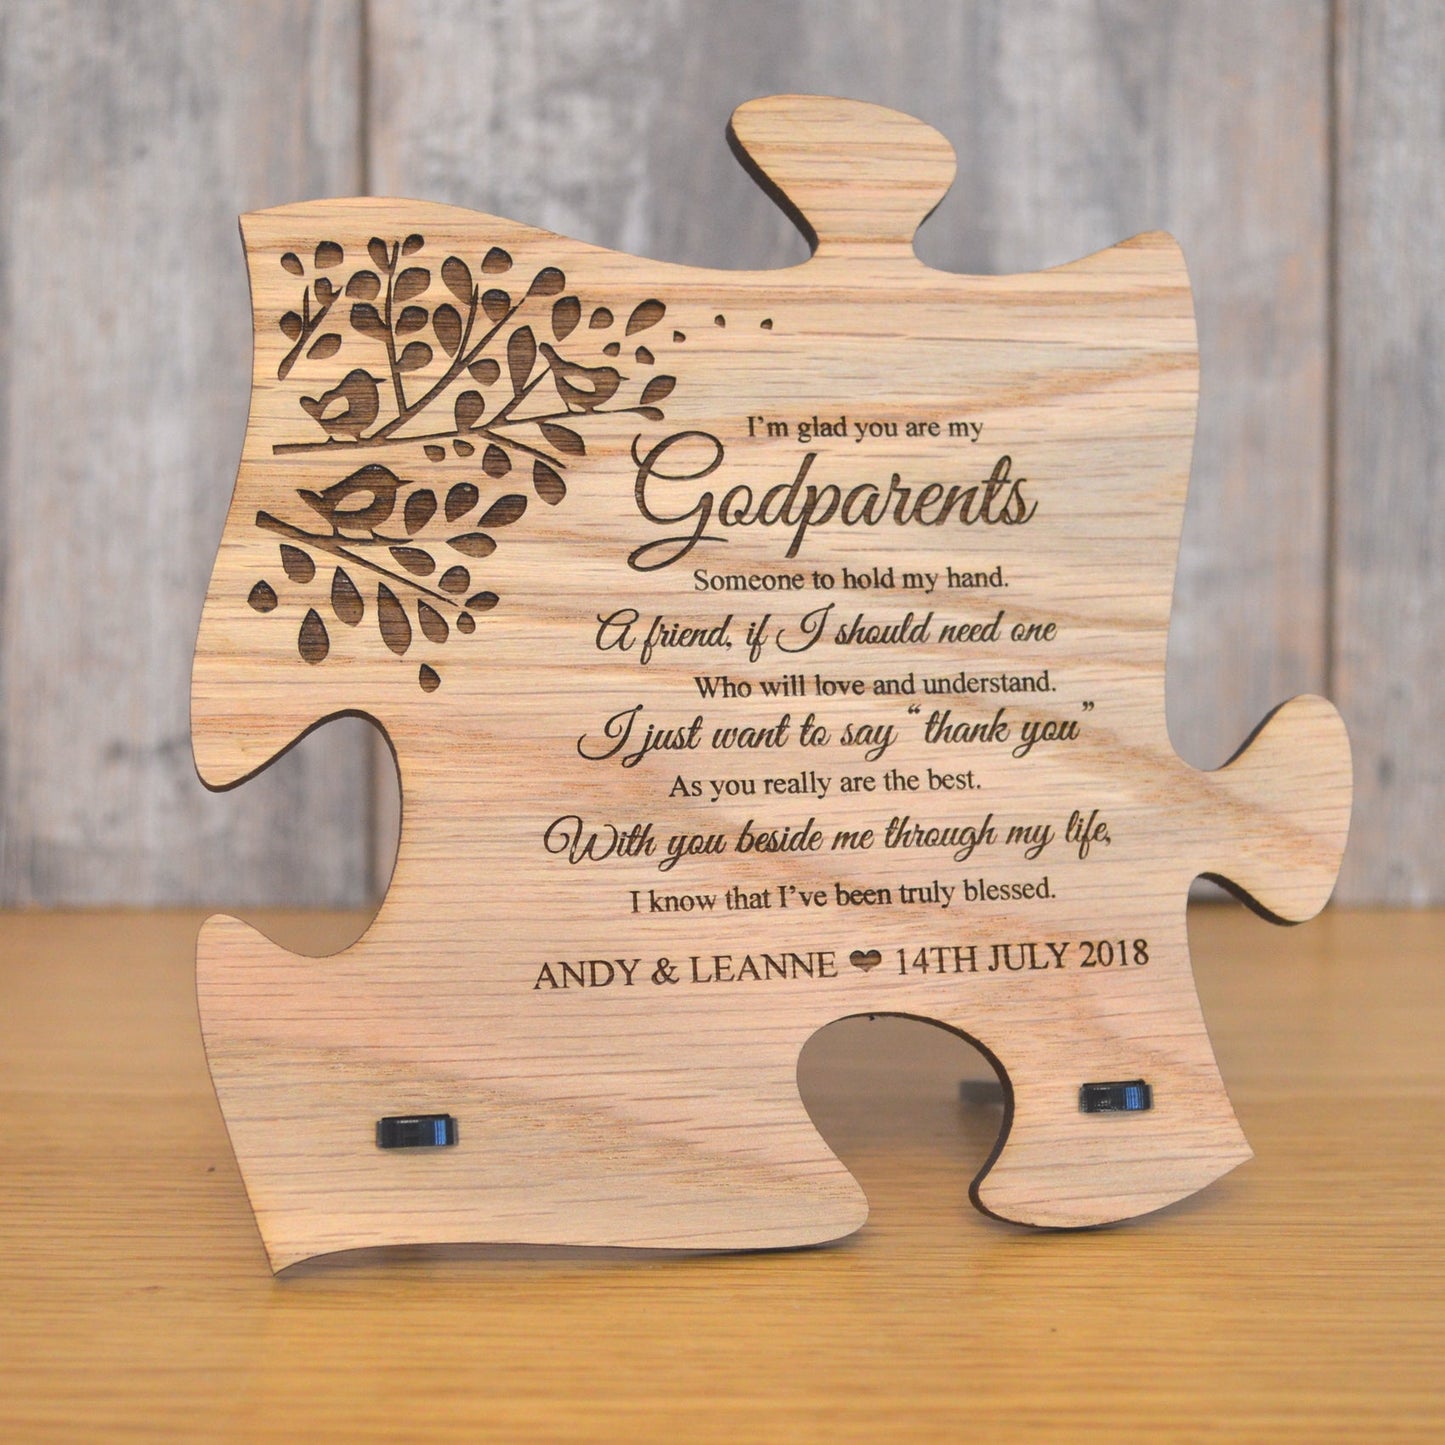 Unique Gift For Godmother - Personalised Wooden Jigsaw Puzzle Plaque